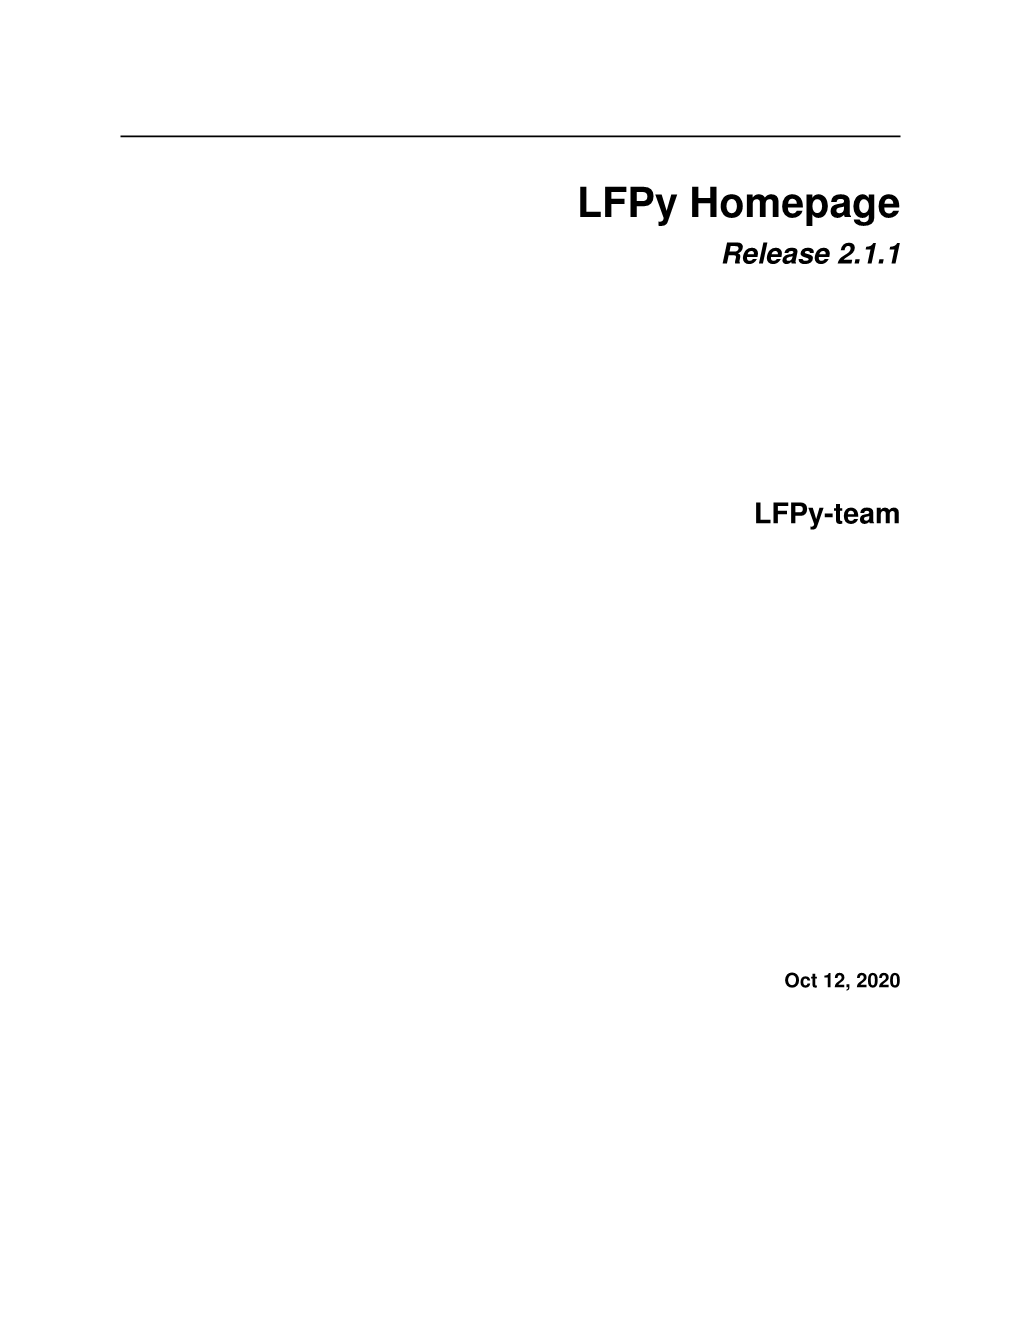 Lfpy Homepage Release 2.1.1